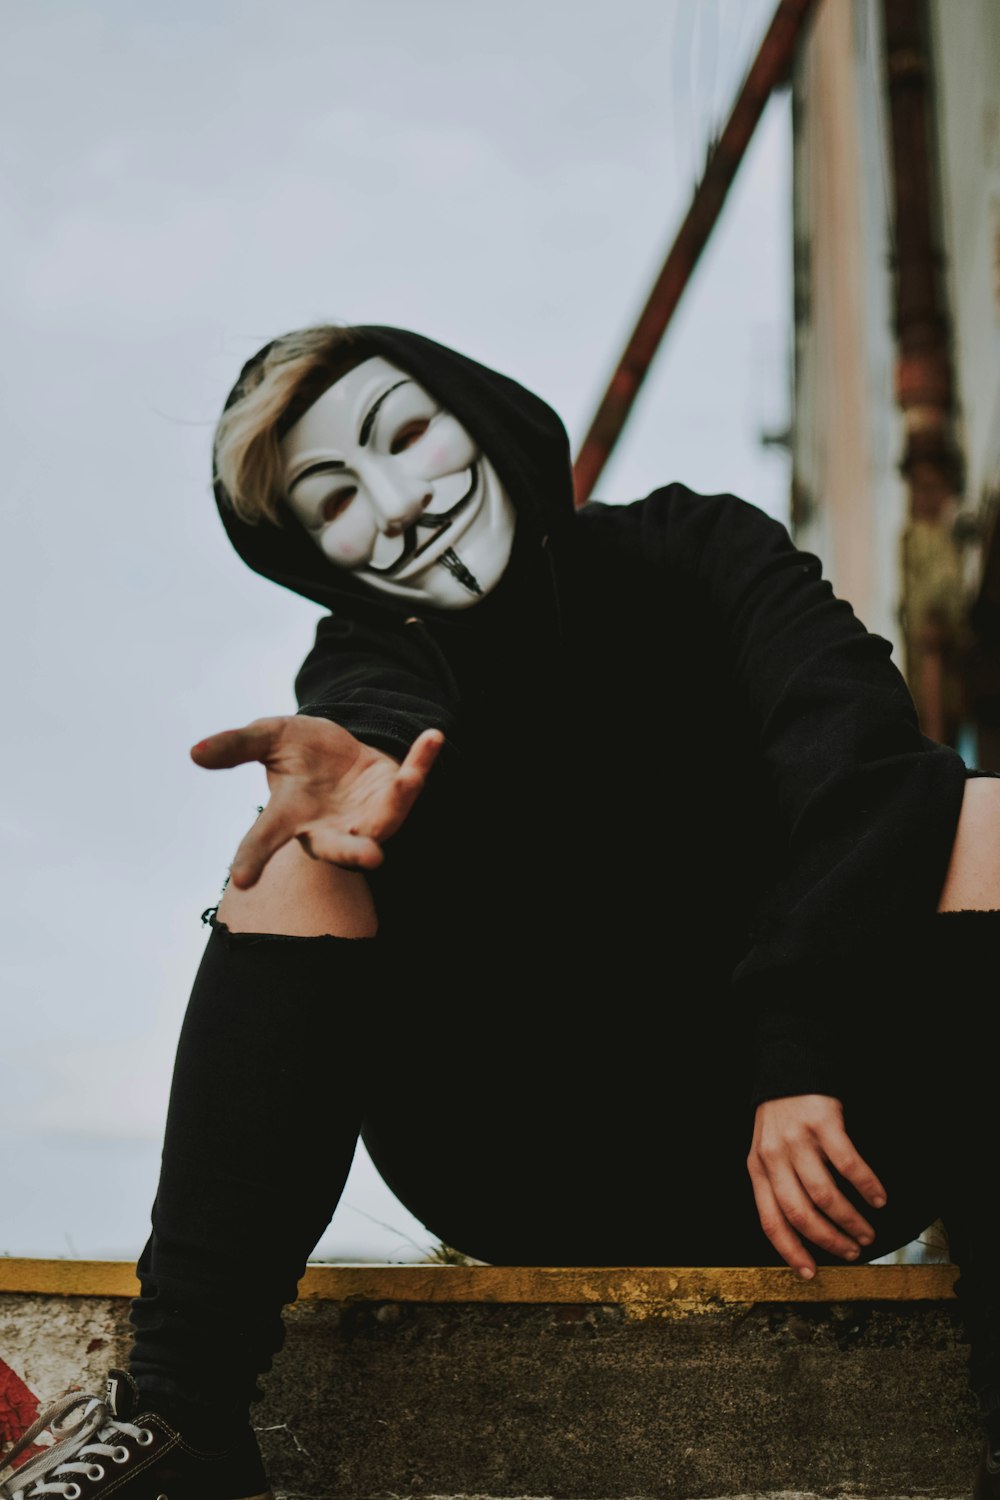 person wearing Guy Fawkes mask